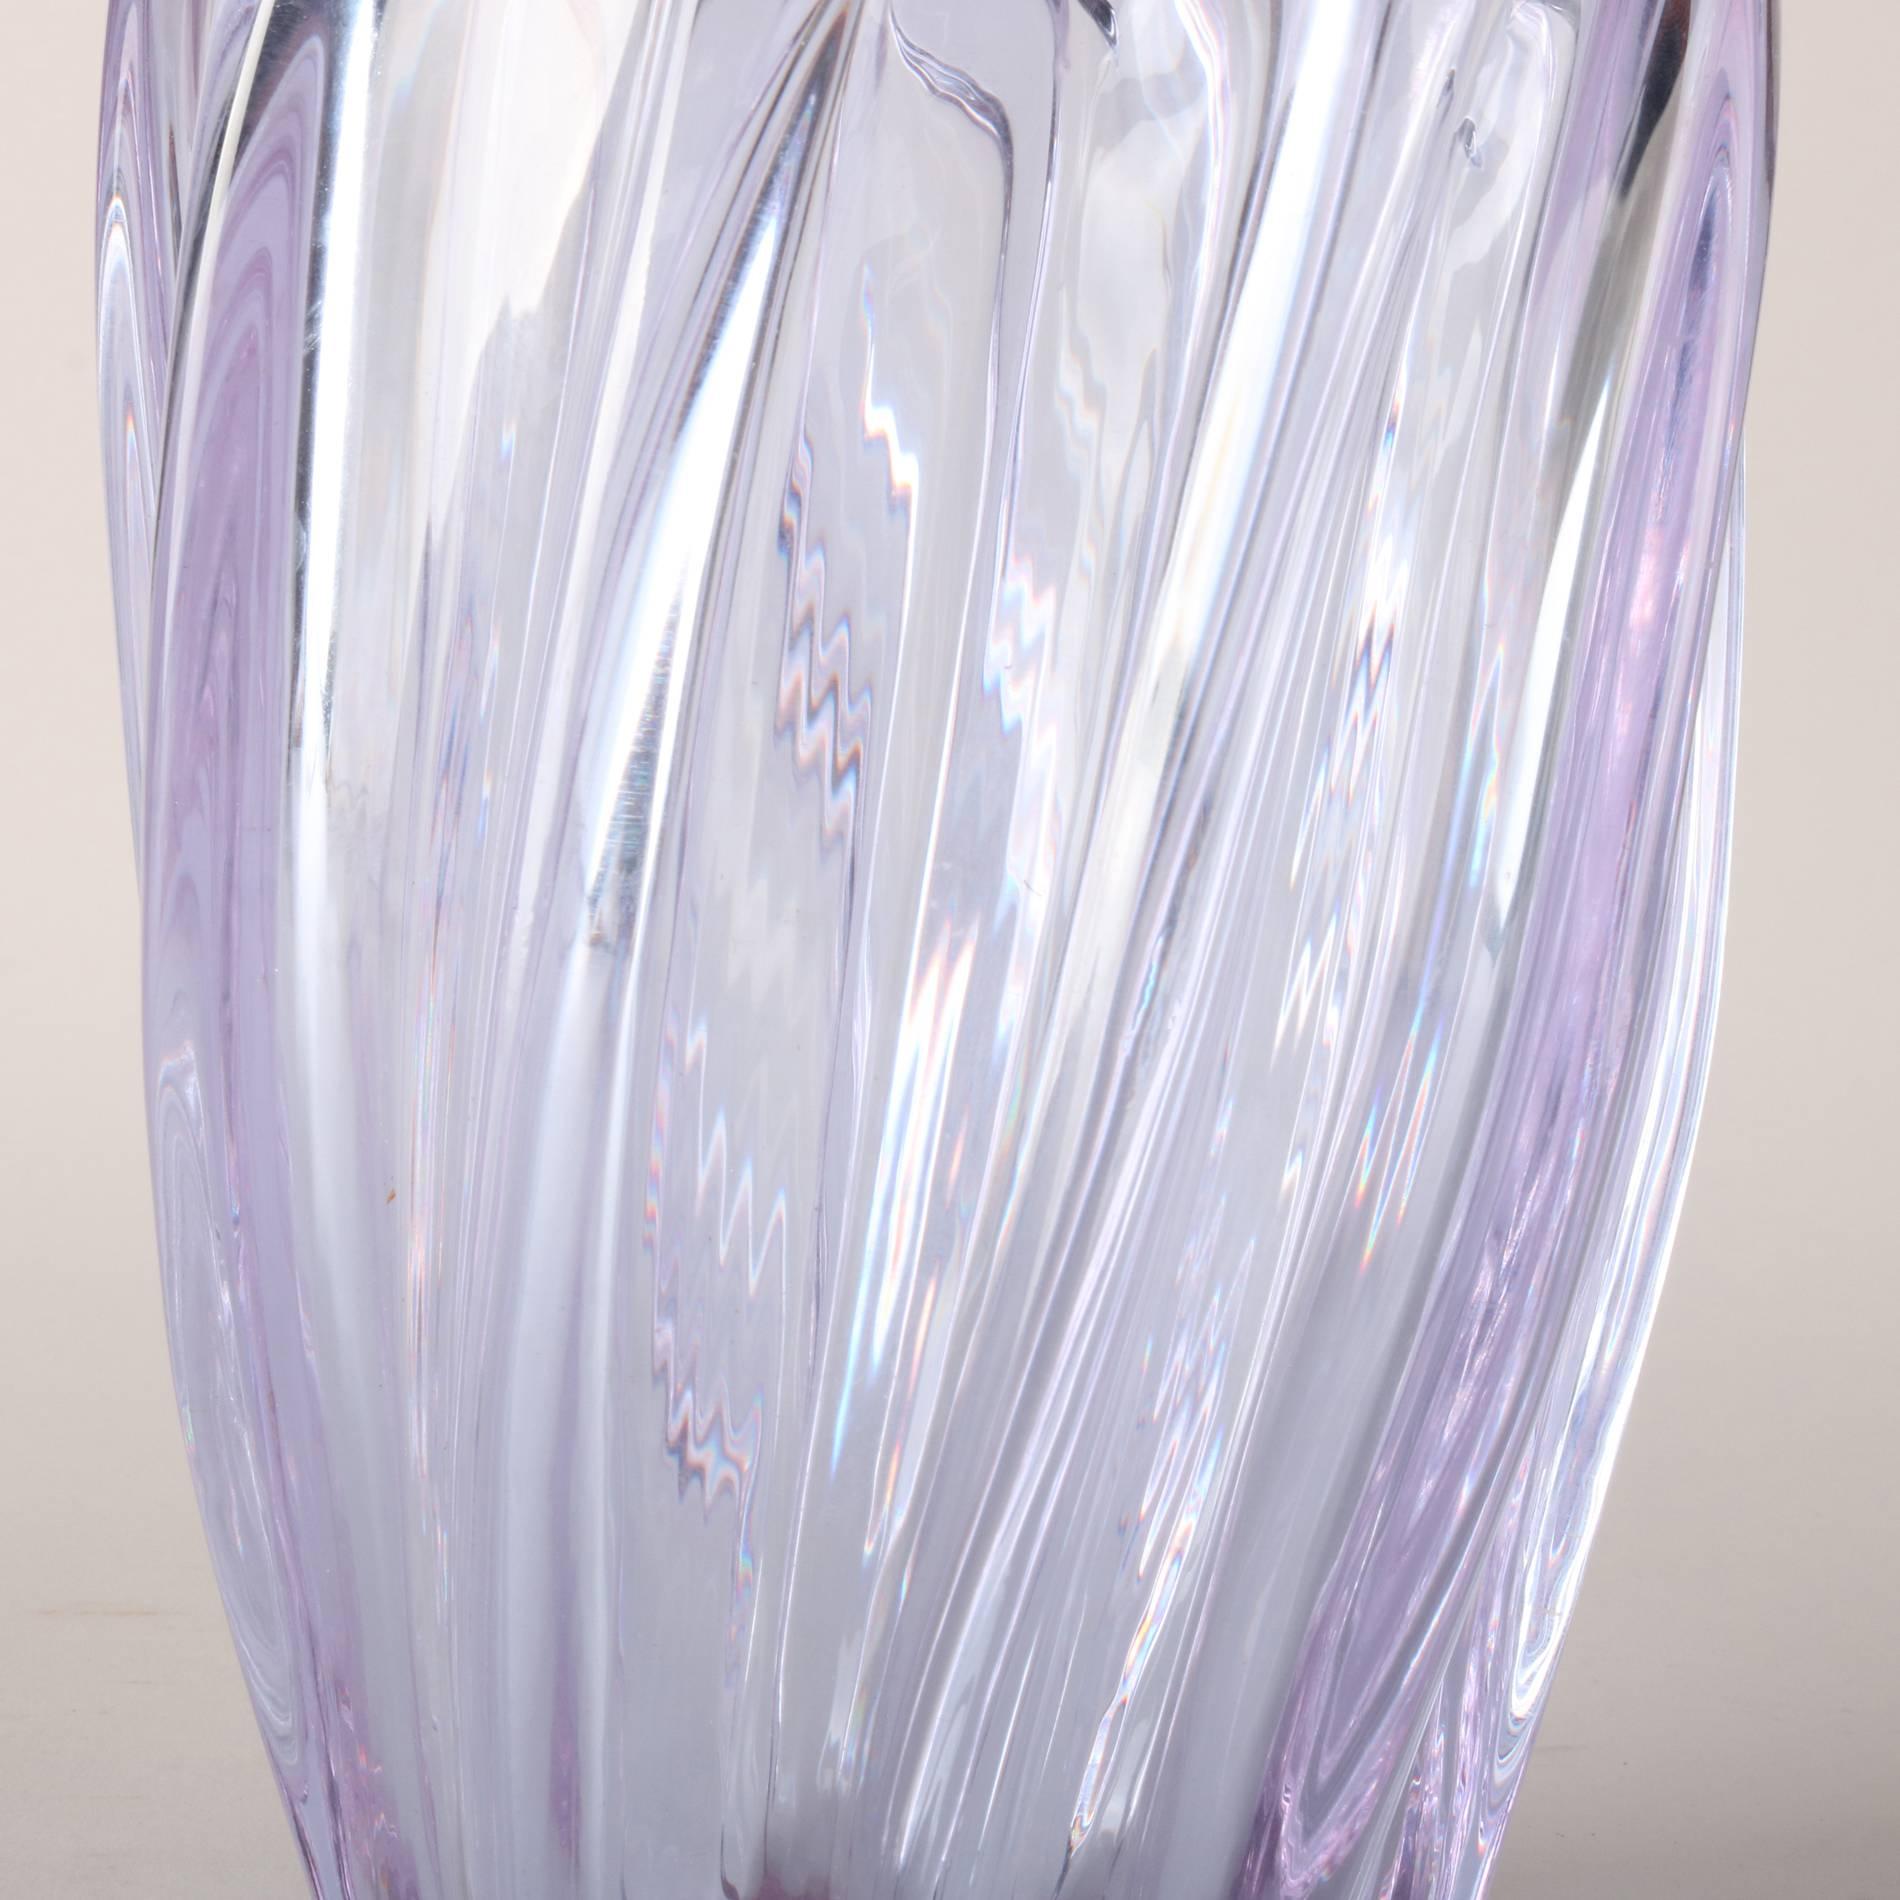 Antique French Baccarat School Lead Crystal Vase, Sky Blue, 20th Century 1